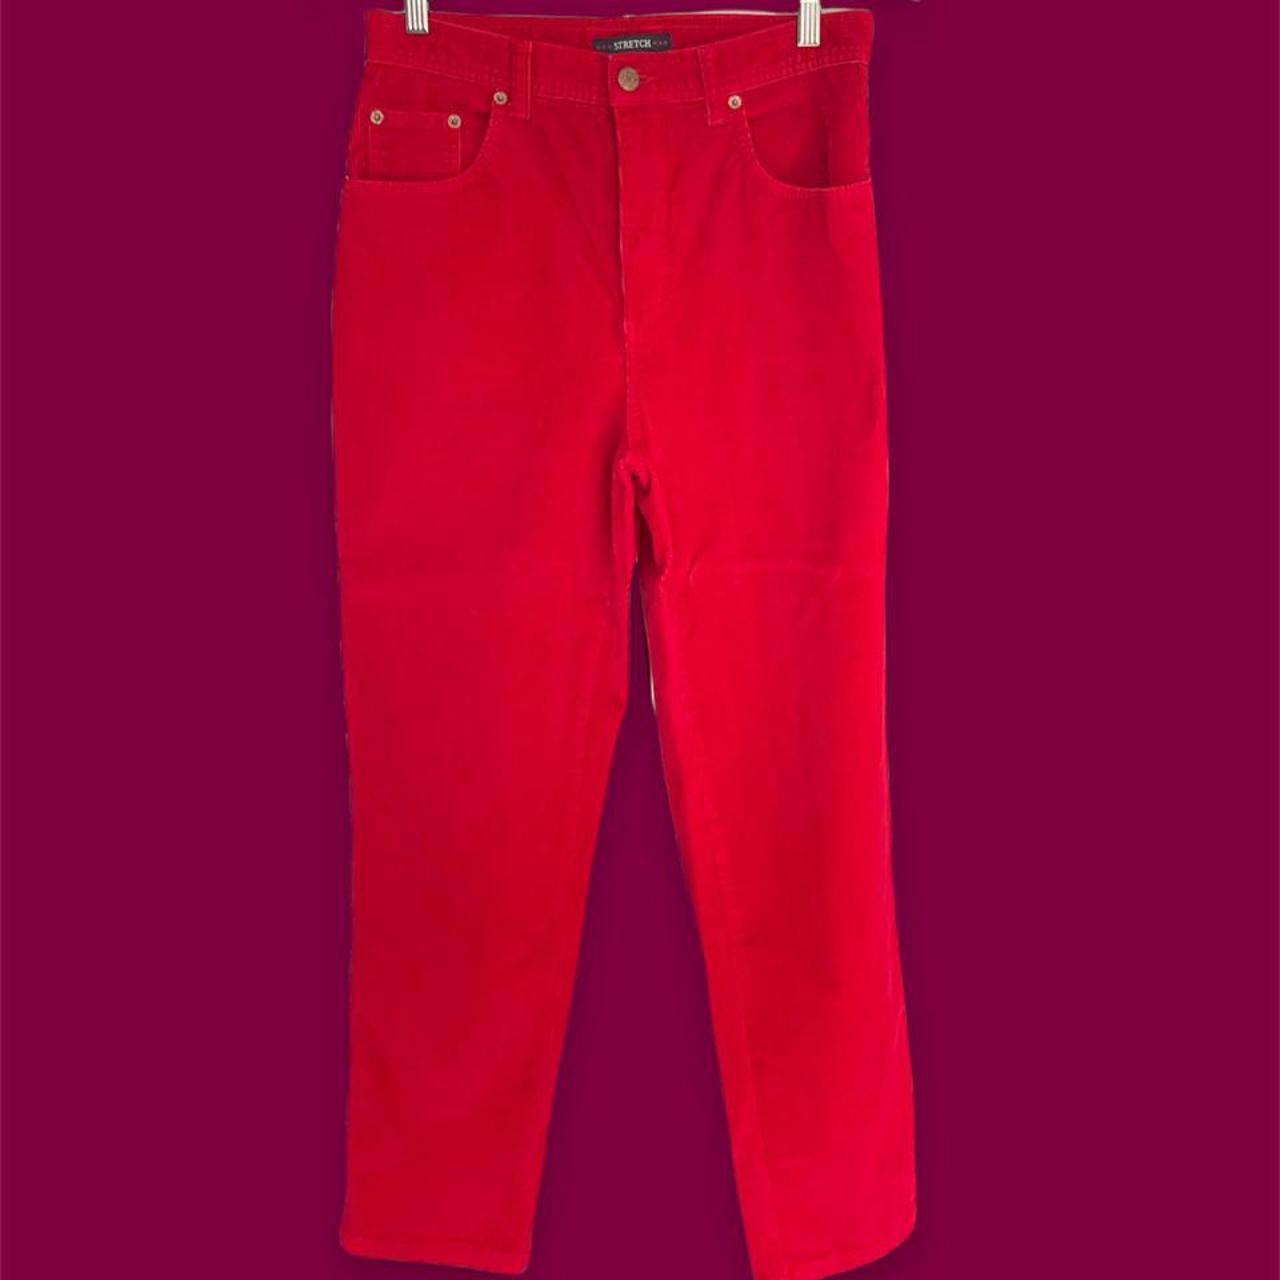 Product Image 4 - Bill blass red corduroy jeans
Stretch